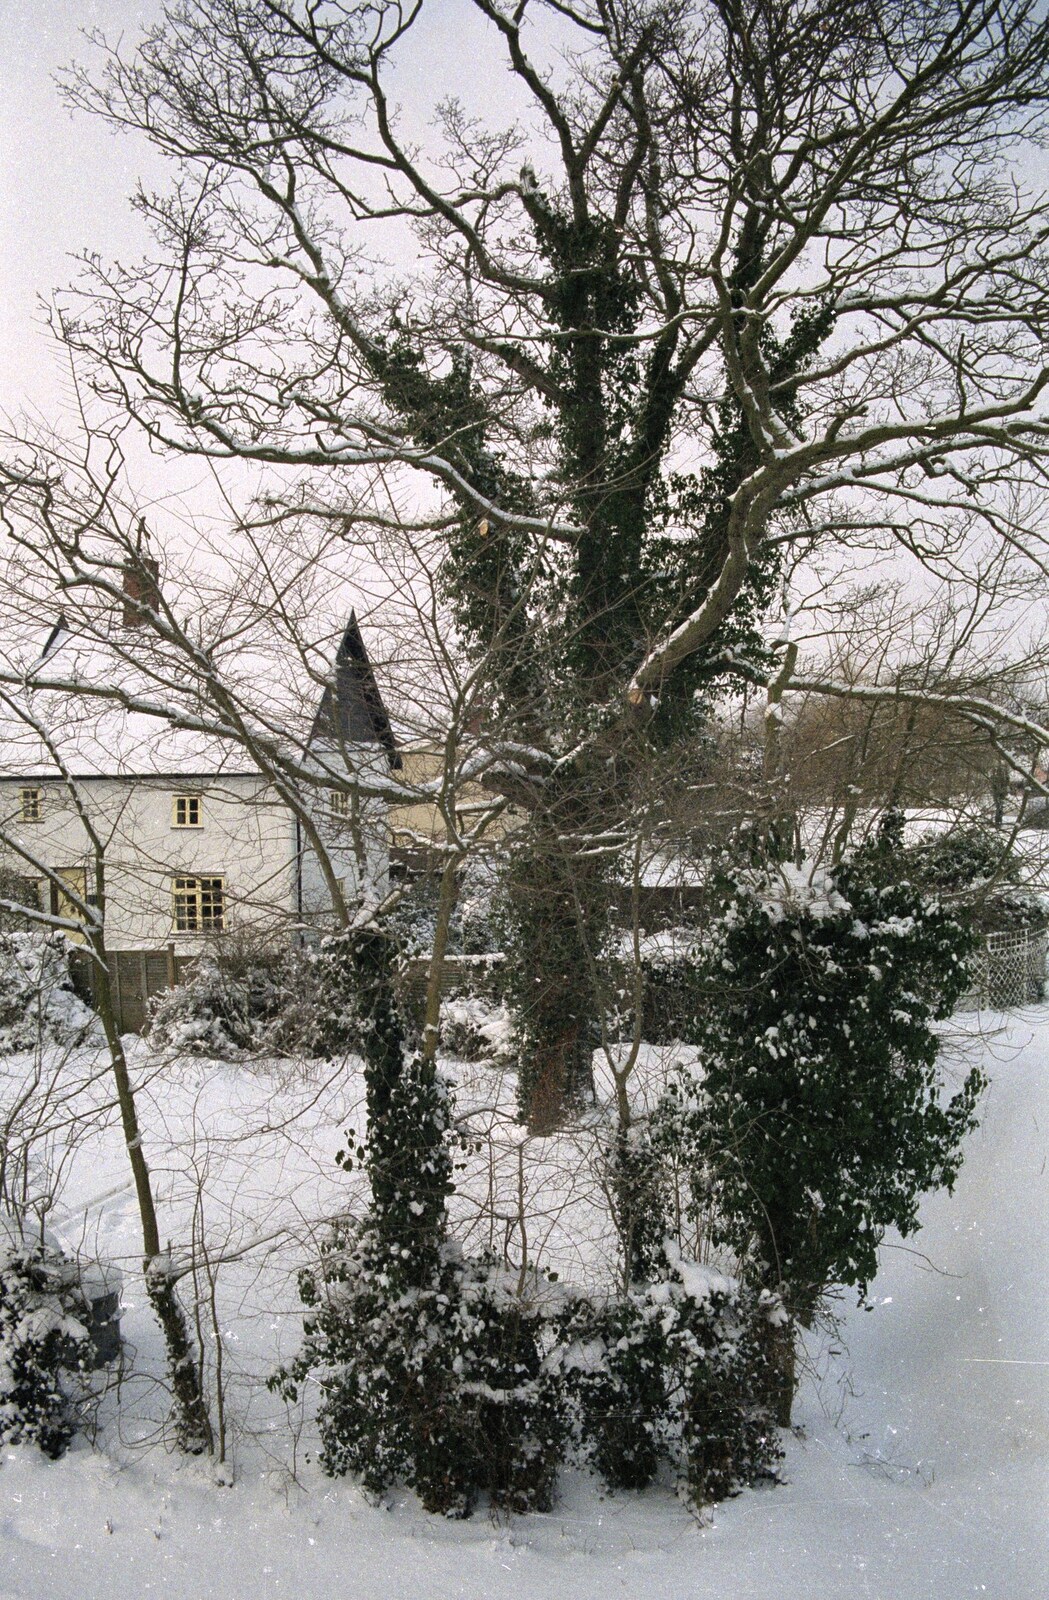 A wintry tree from Snow Days, Stuston and Norwich, Suffolk and Norfolk - 4th February 1991